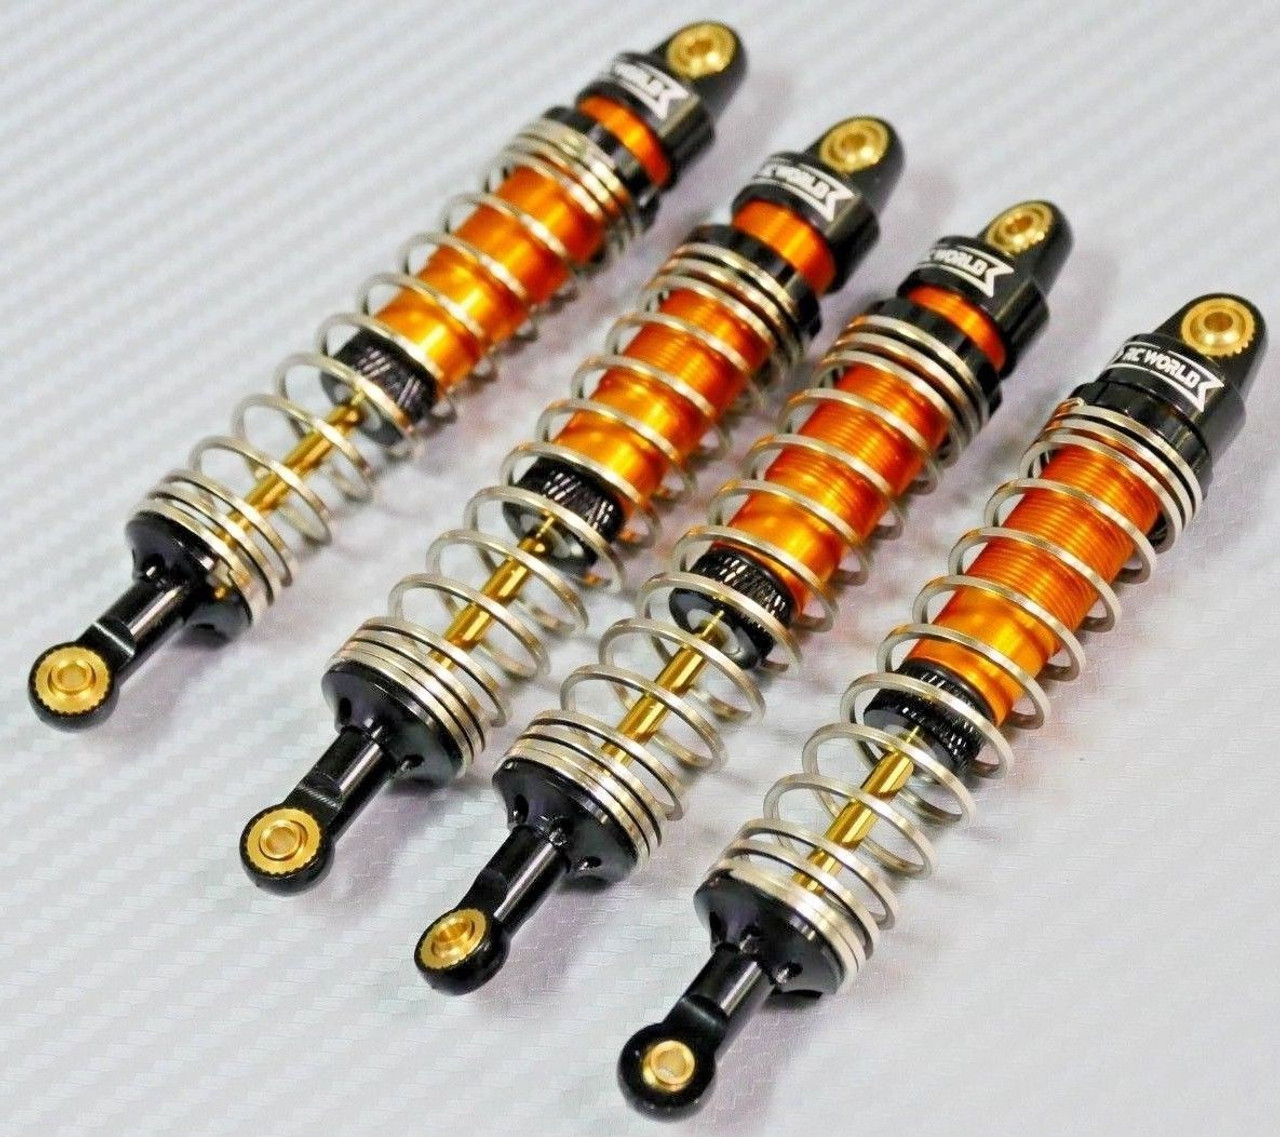 2 pc Details about   RC Off-road SUSPENSION SHOCKS Big Bore XL Adjustable Coil Over RED 110MM 